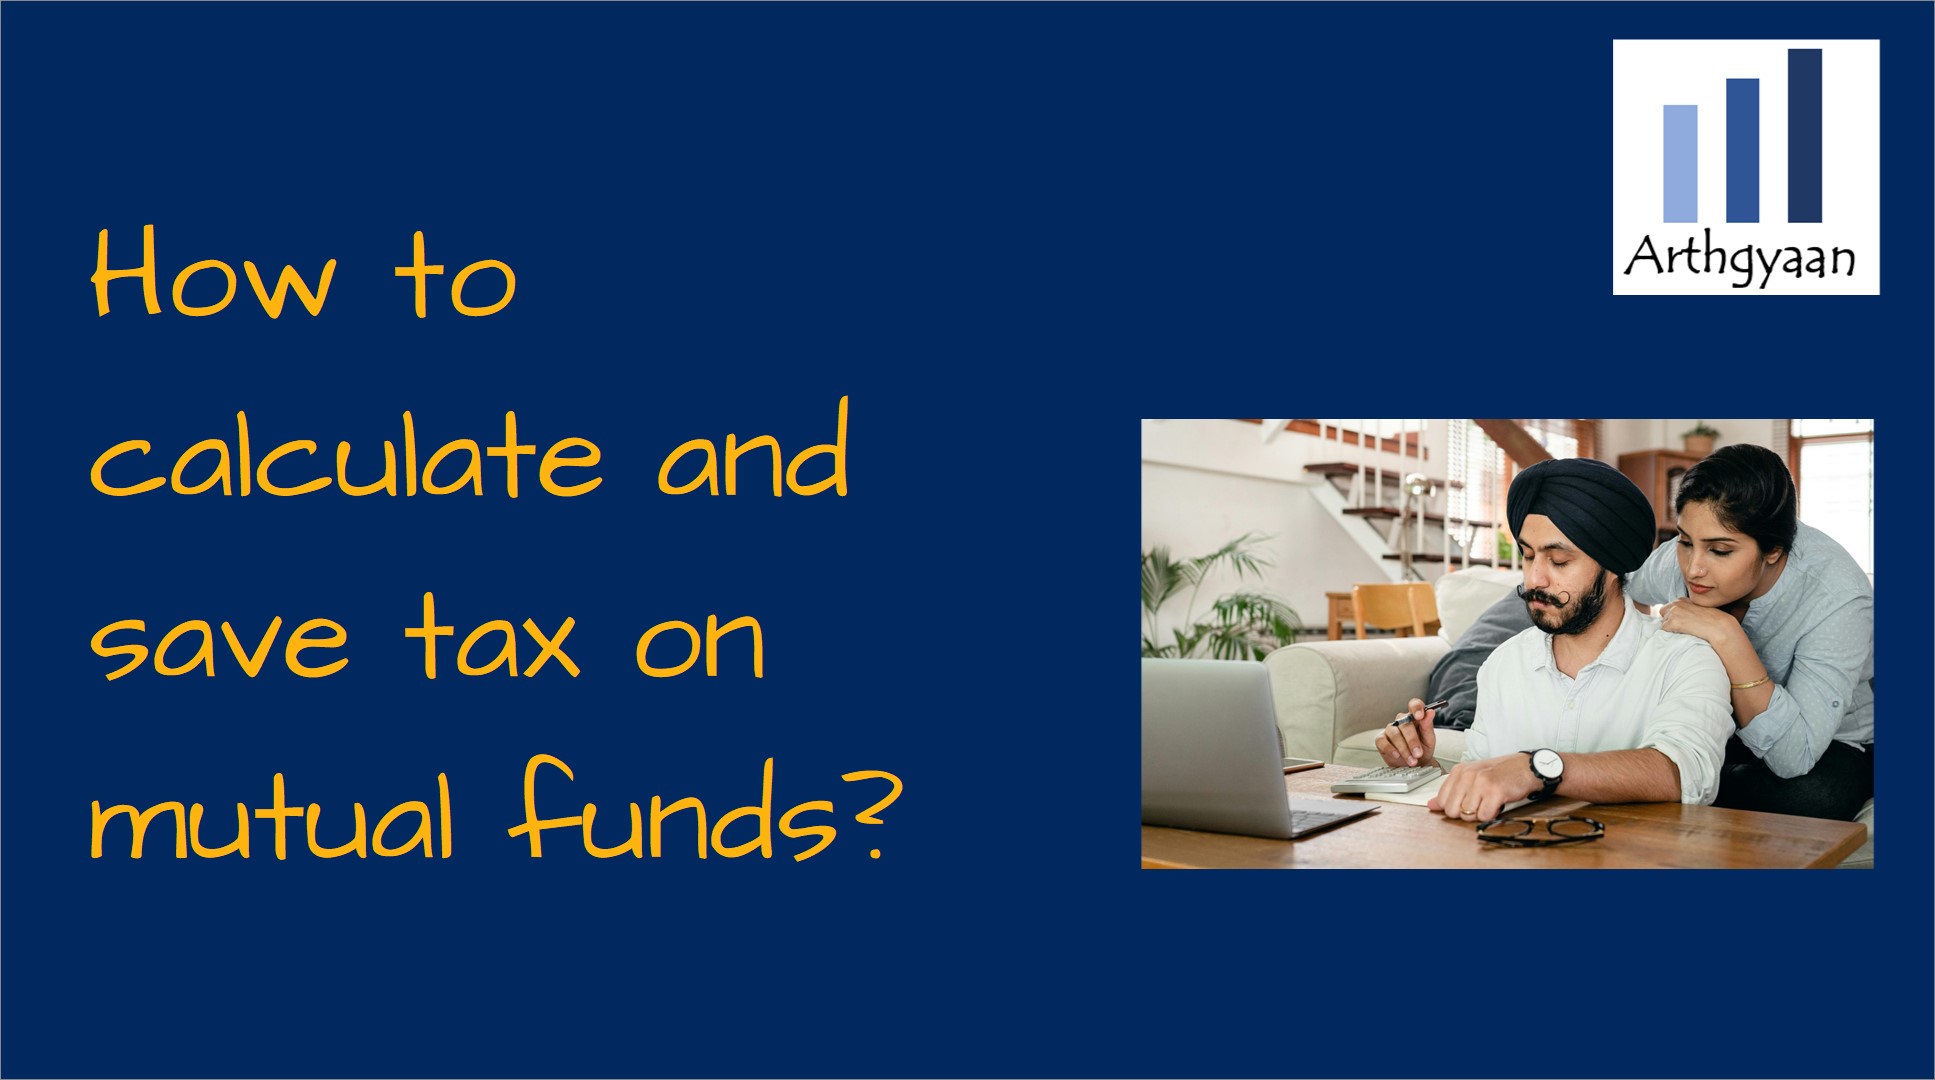 How to calculate and save tax on mutual funds?